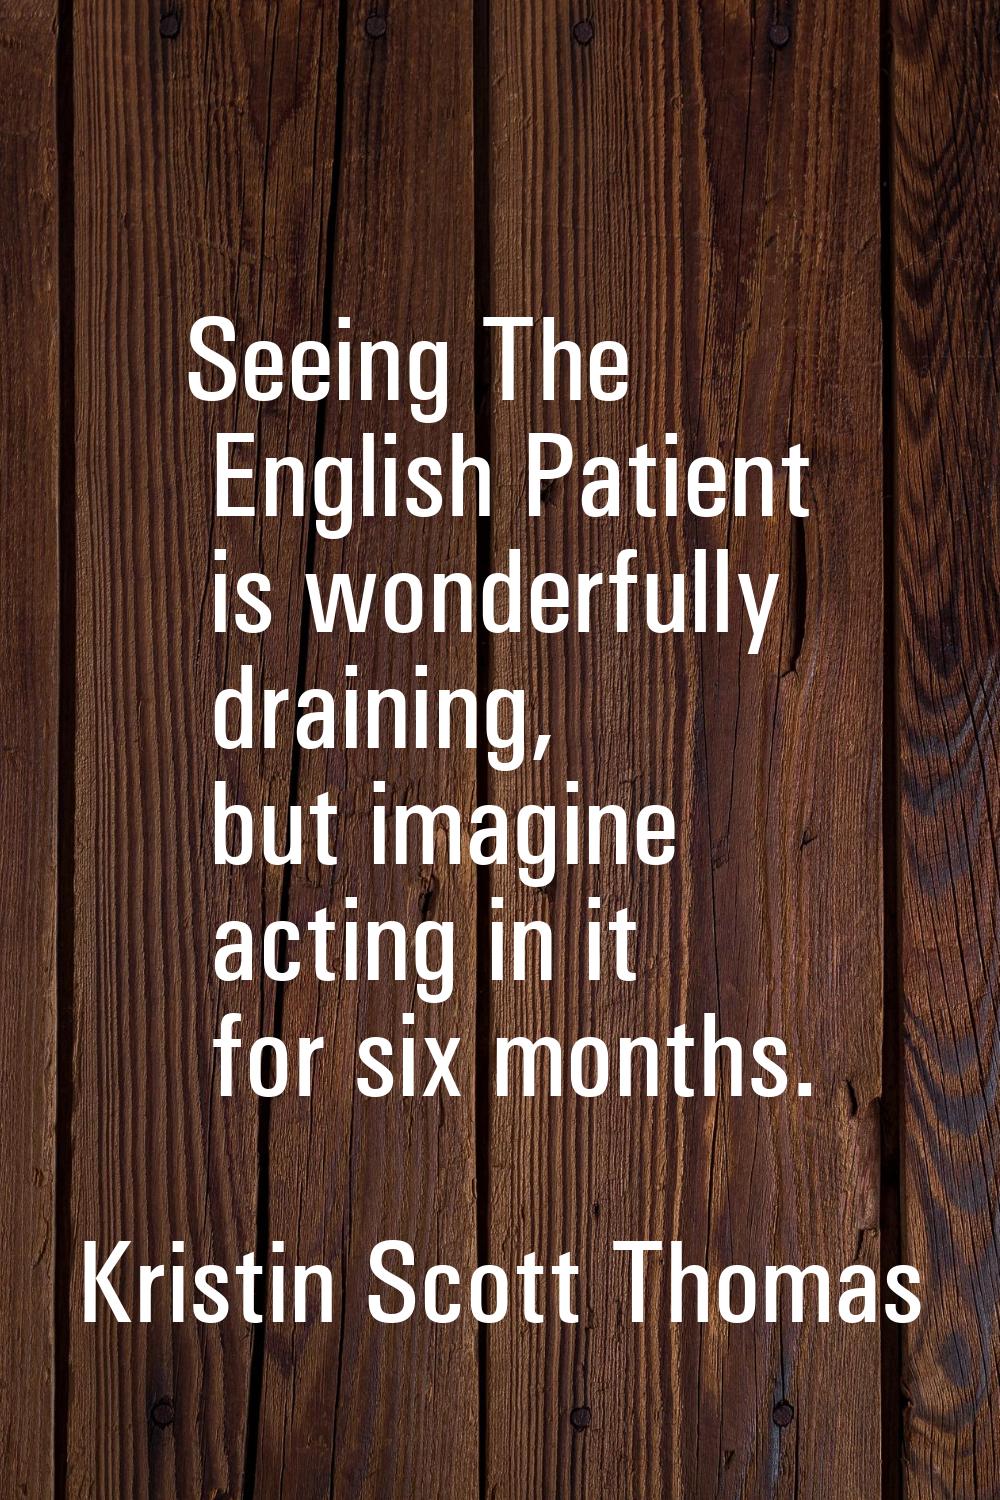 Seeing The English Patient is wonderfully draining, but imagine acting in it for six months.